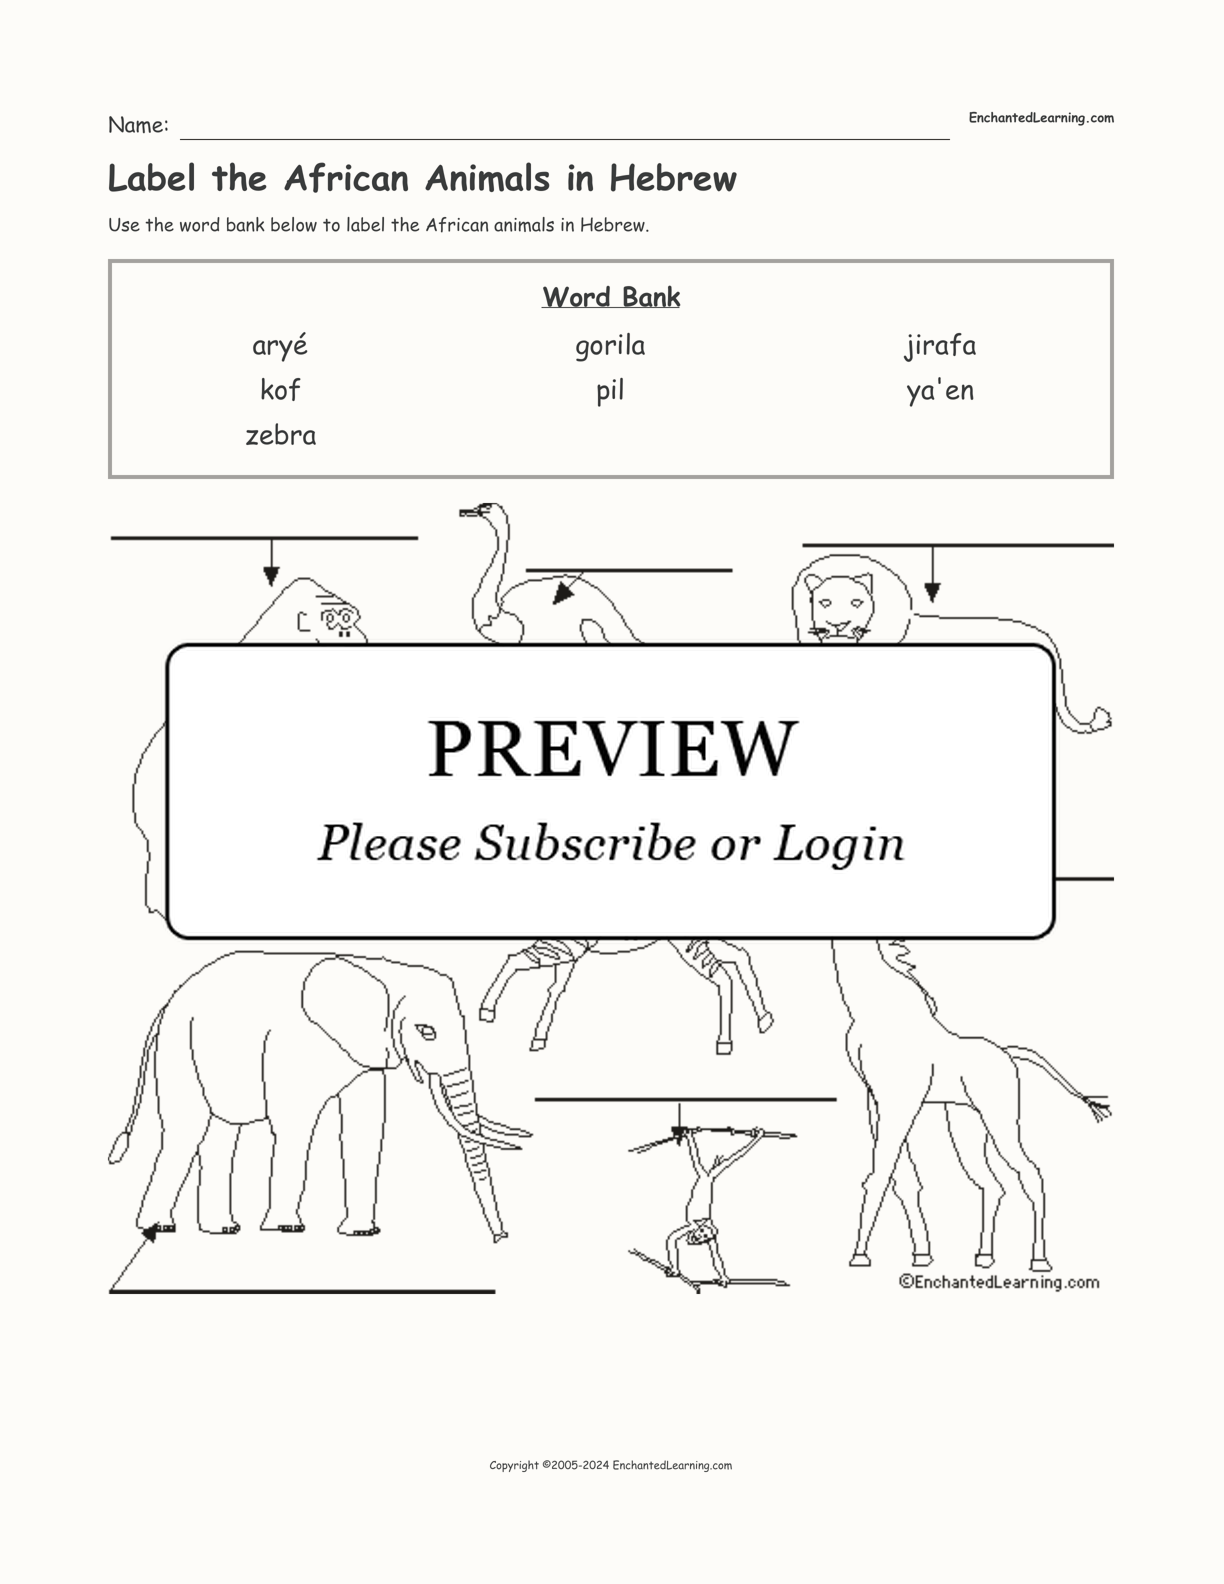 Label the African Animals in Hebrew interactive worksheet page 1